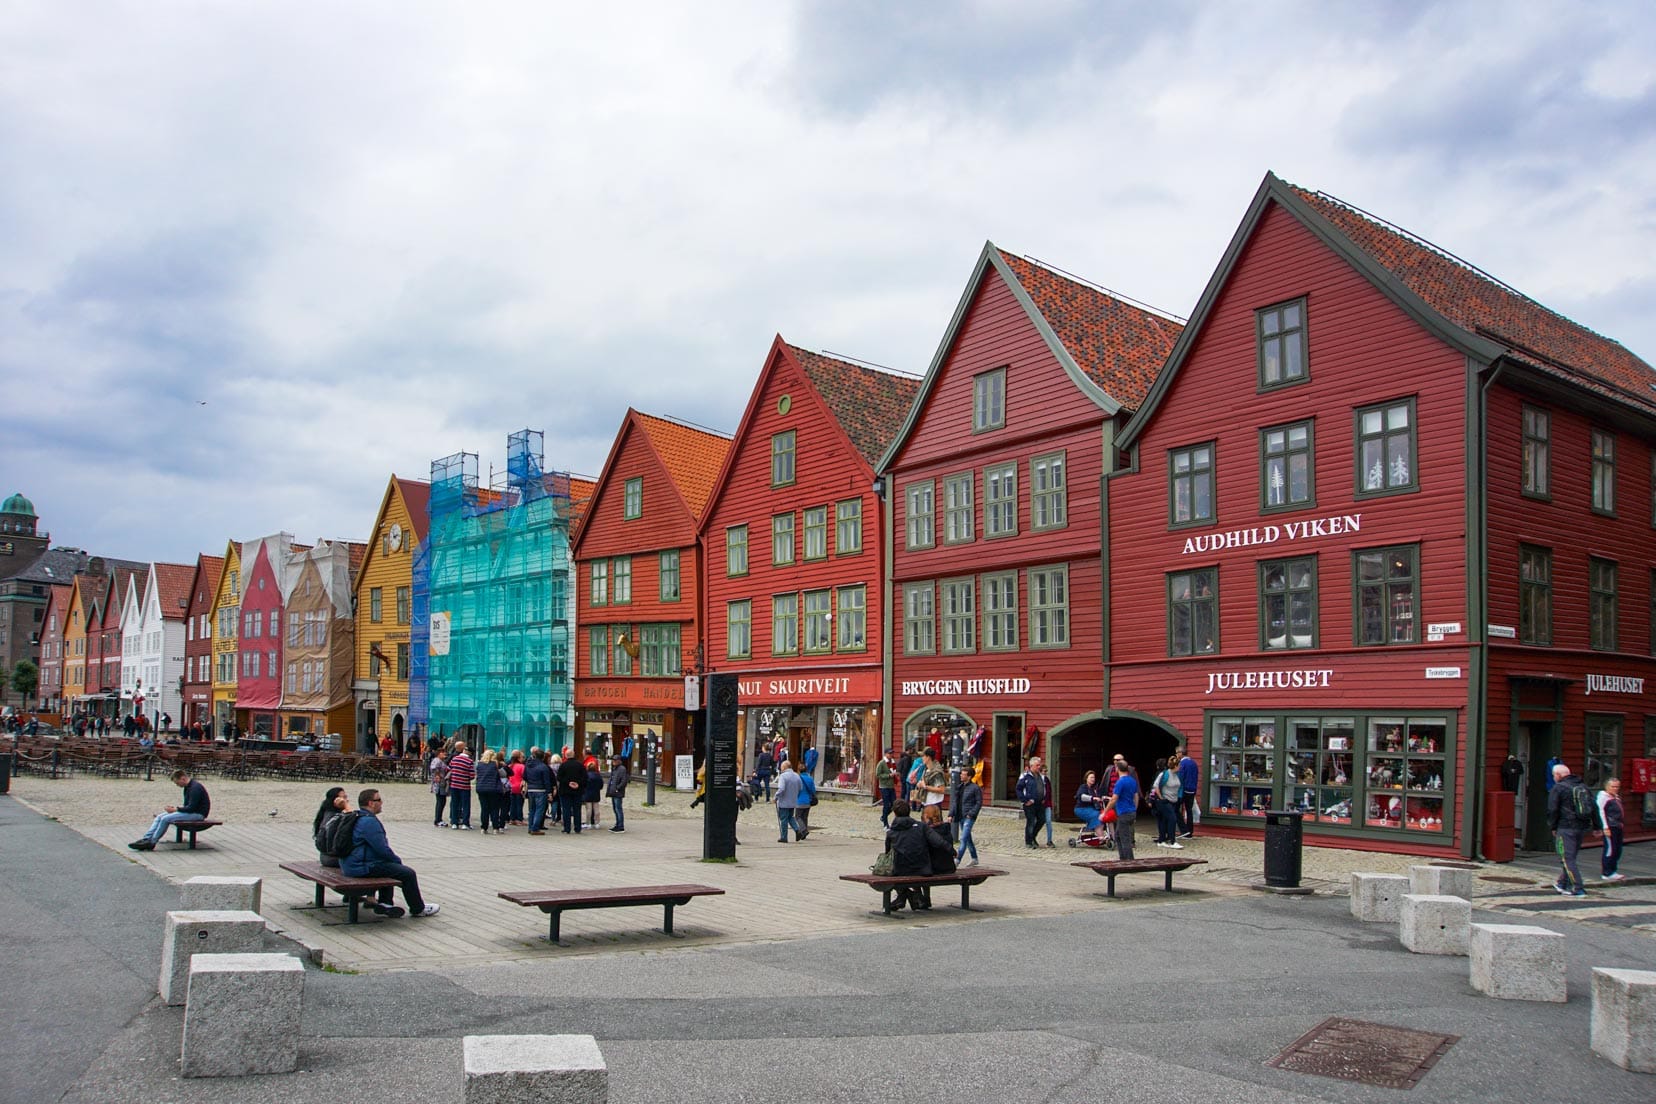 Bergen's-Bryggen and colourful buildings